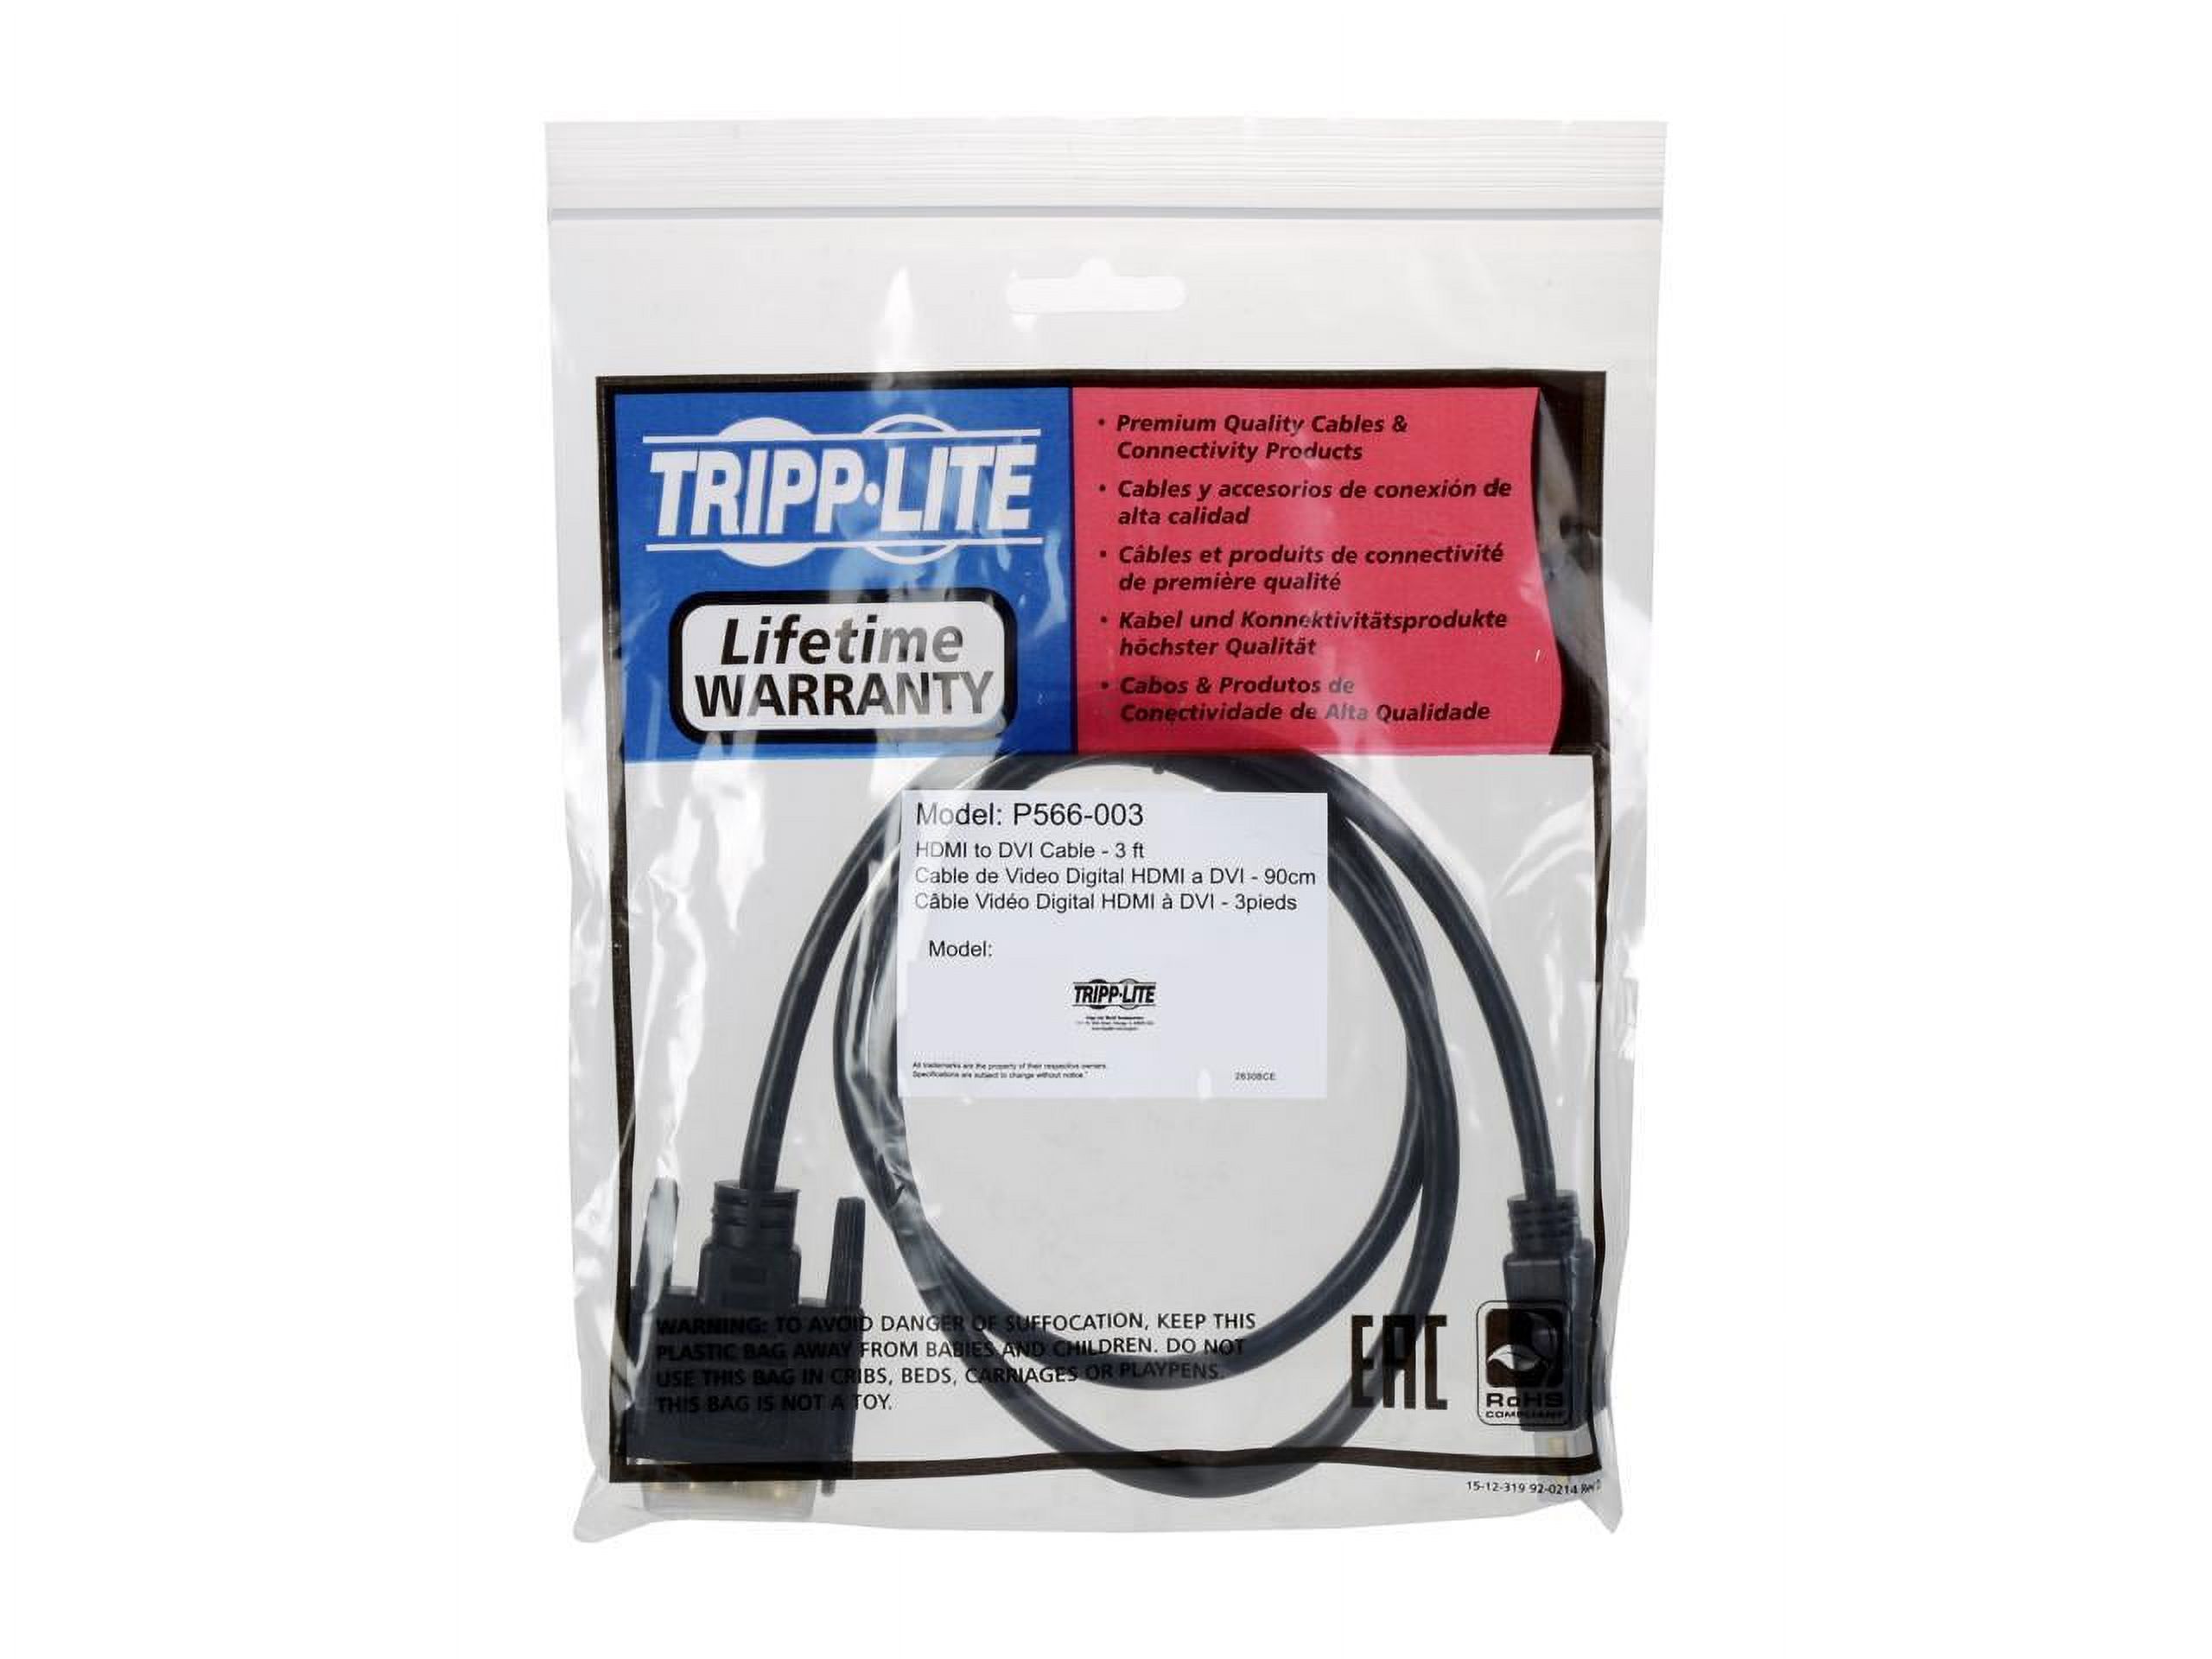 Tripp Lite P566-003 HDMI to DVI Cable, Digital Monitor Adapter Cable (HDMI to DVI D M/M), 1080P, 3 ft. - image 3 of 3